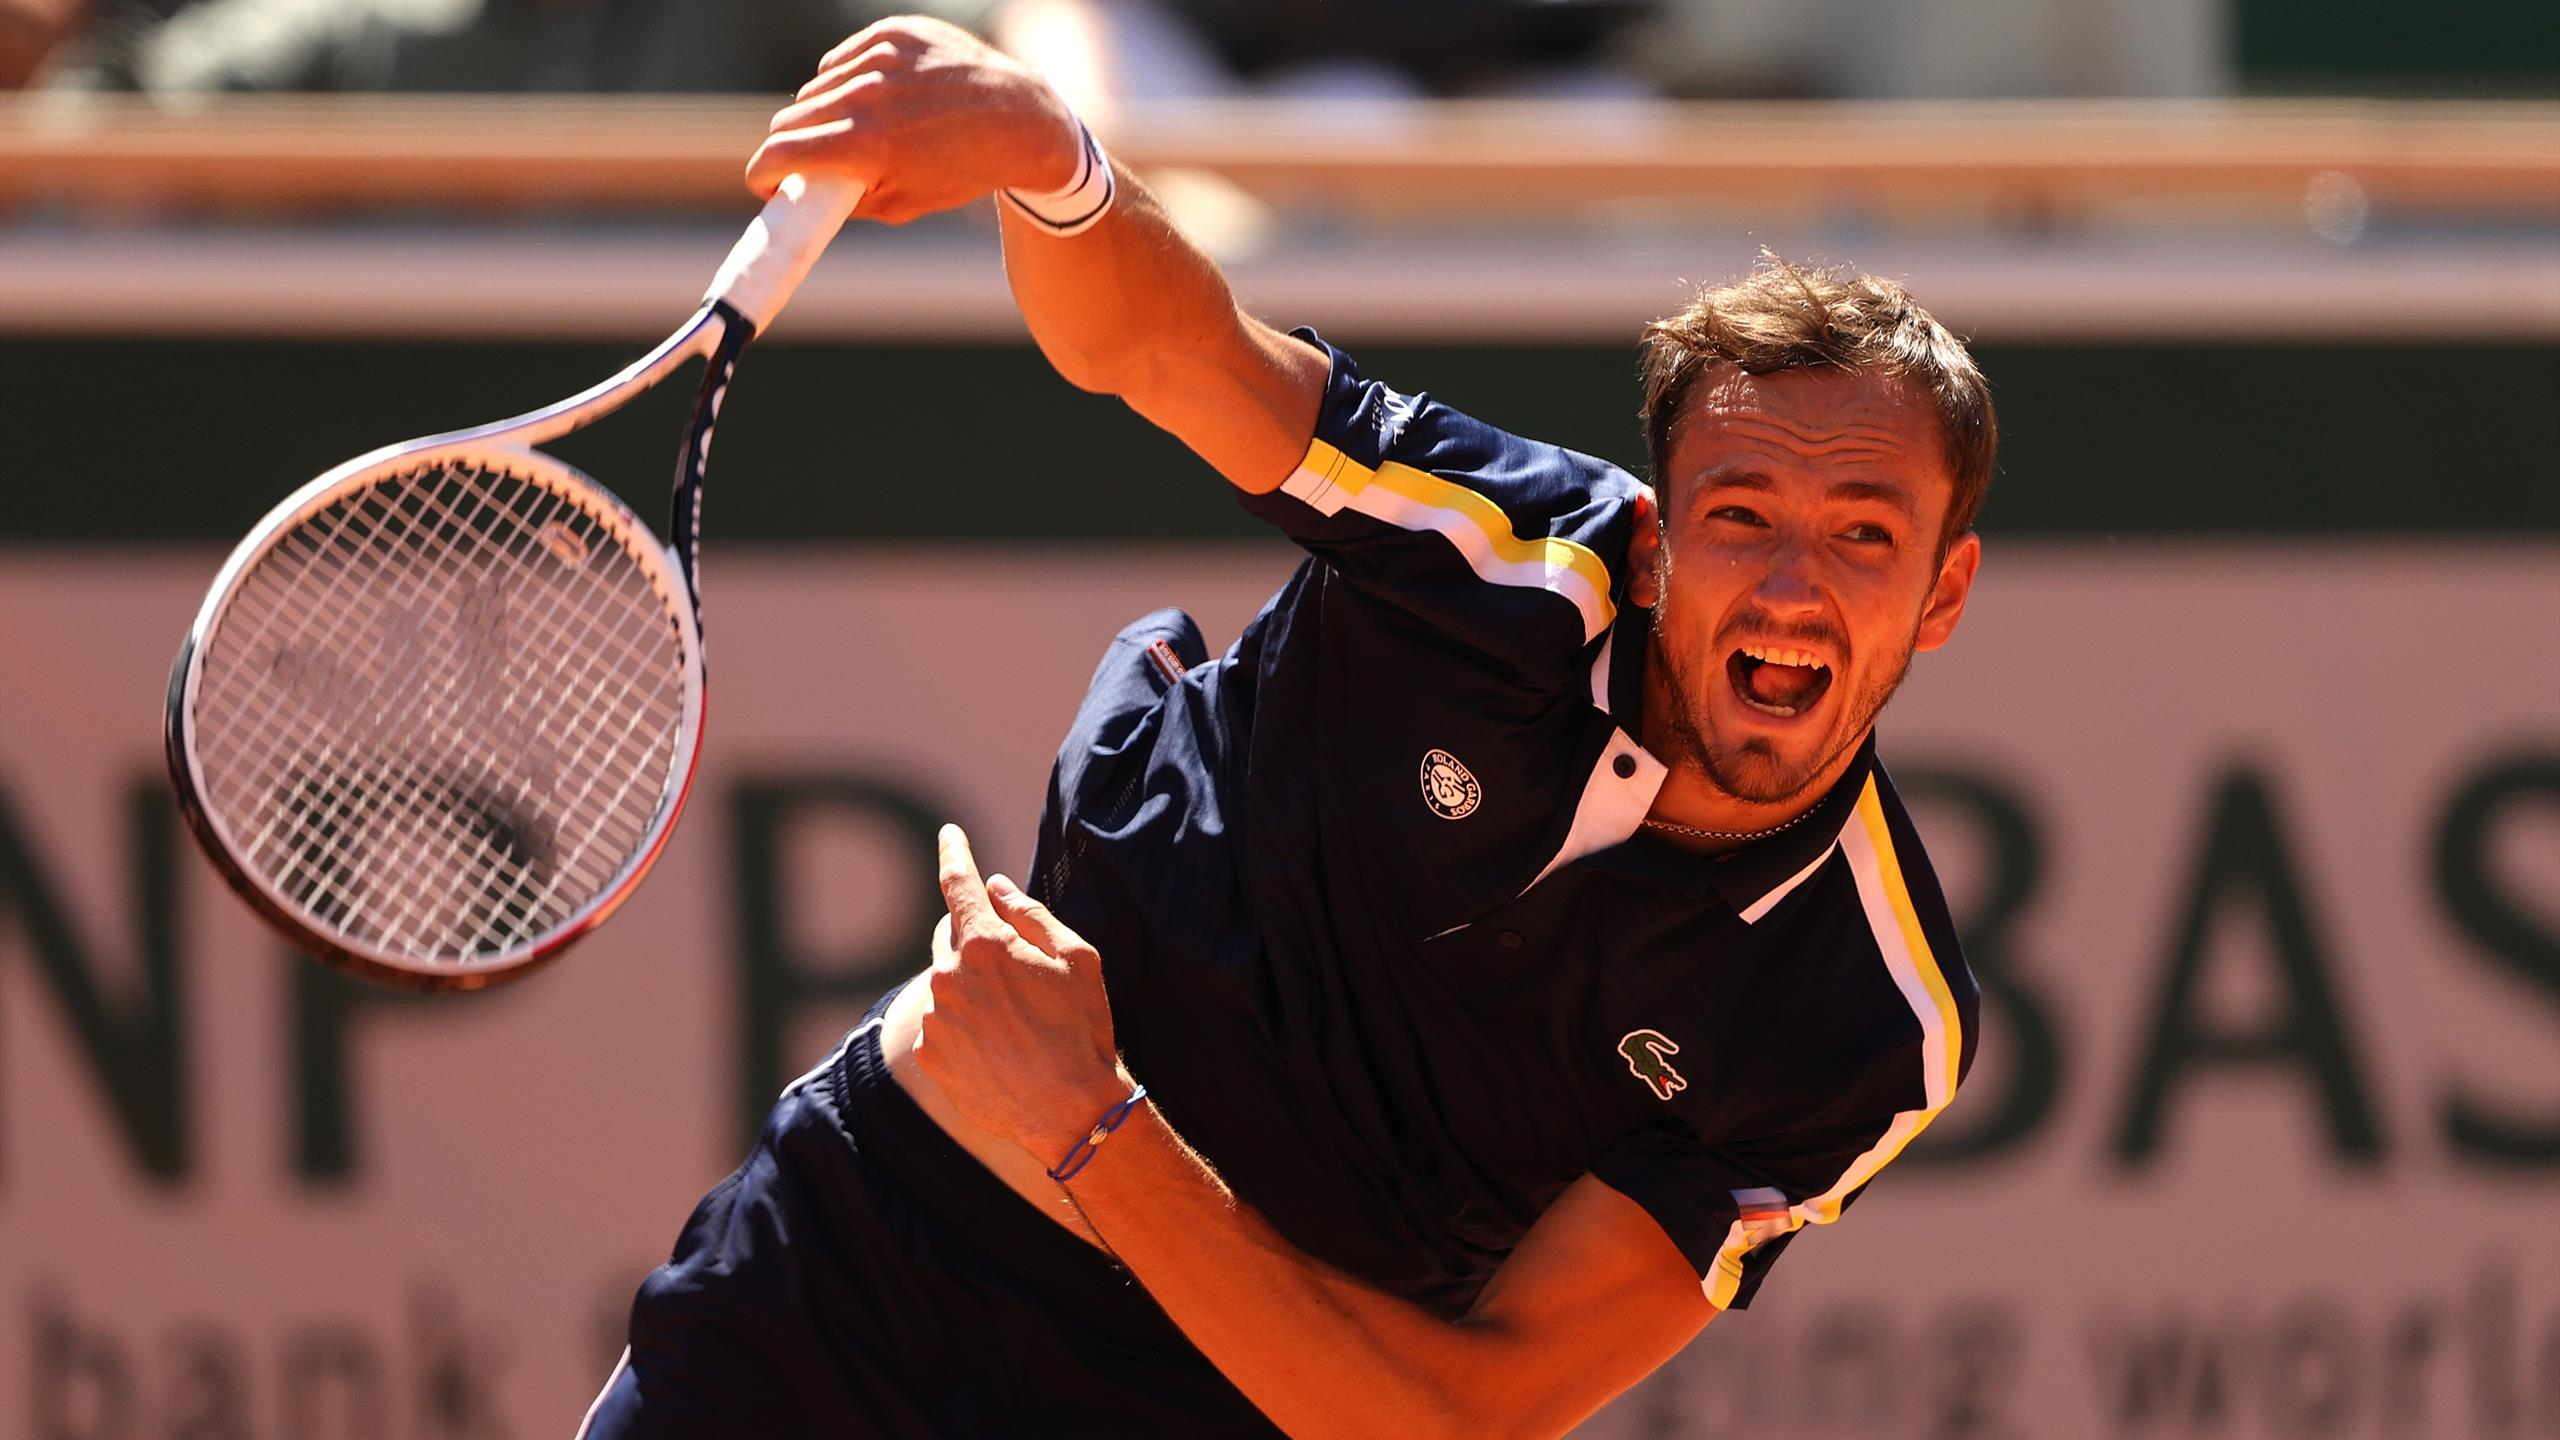 Roland Garros 2021: Daniil Medvedev VS Reilly Opelka. Match Preview, head-to-head, prediction and where to watch